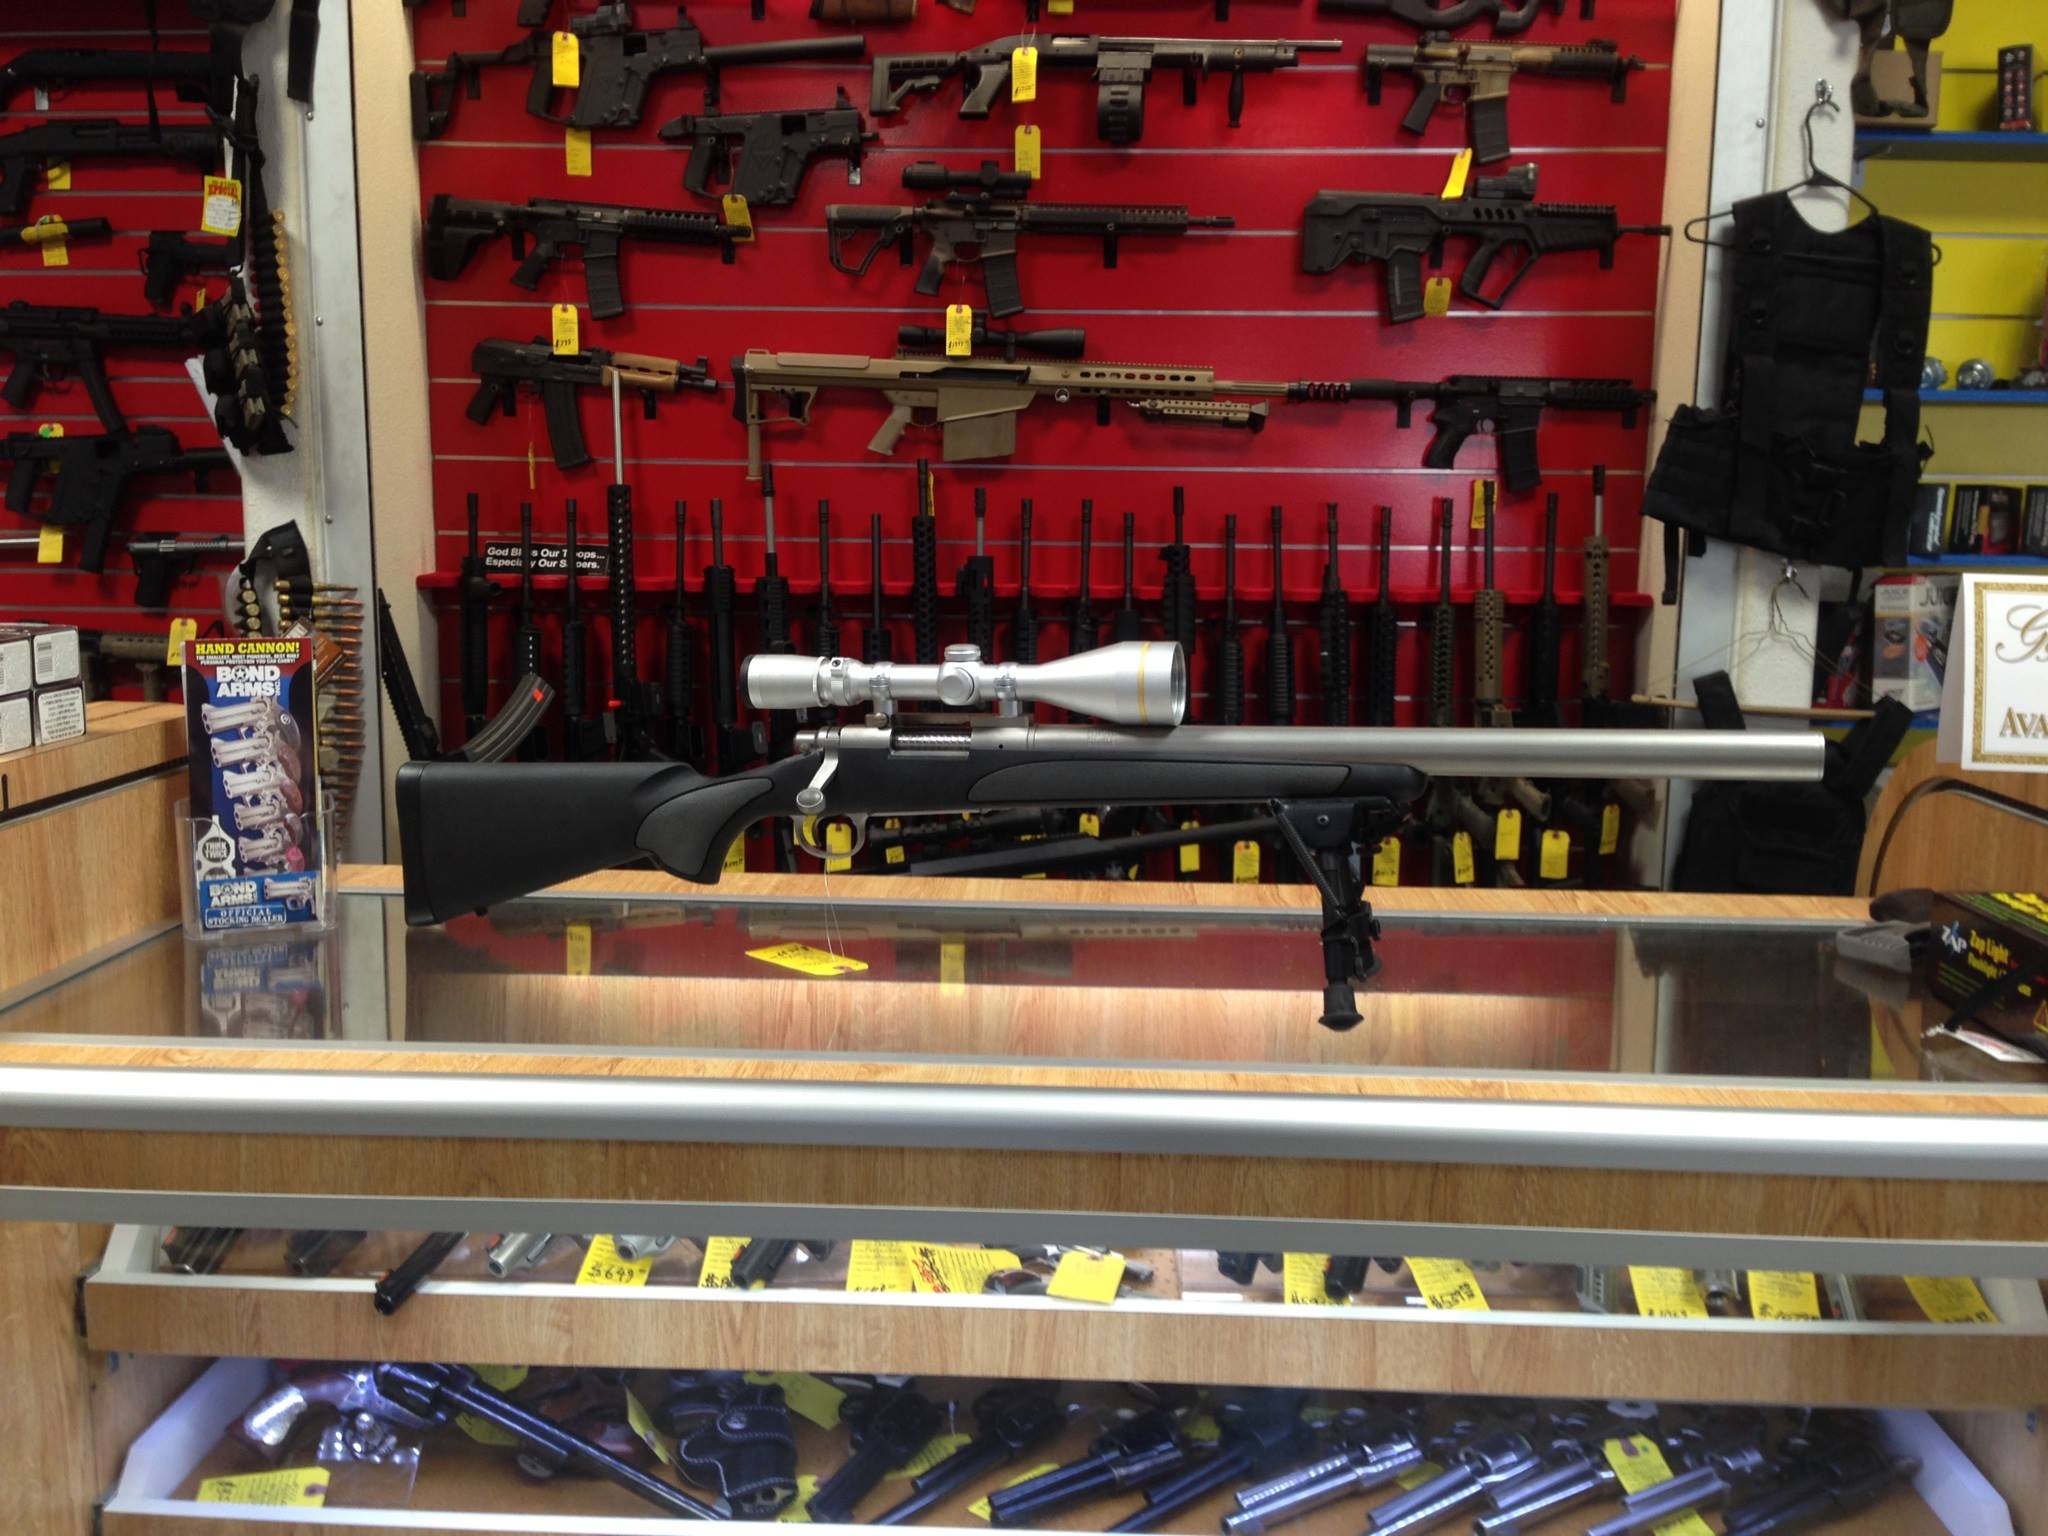 Display cases of rifles and handguns.